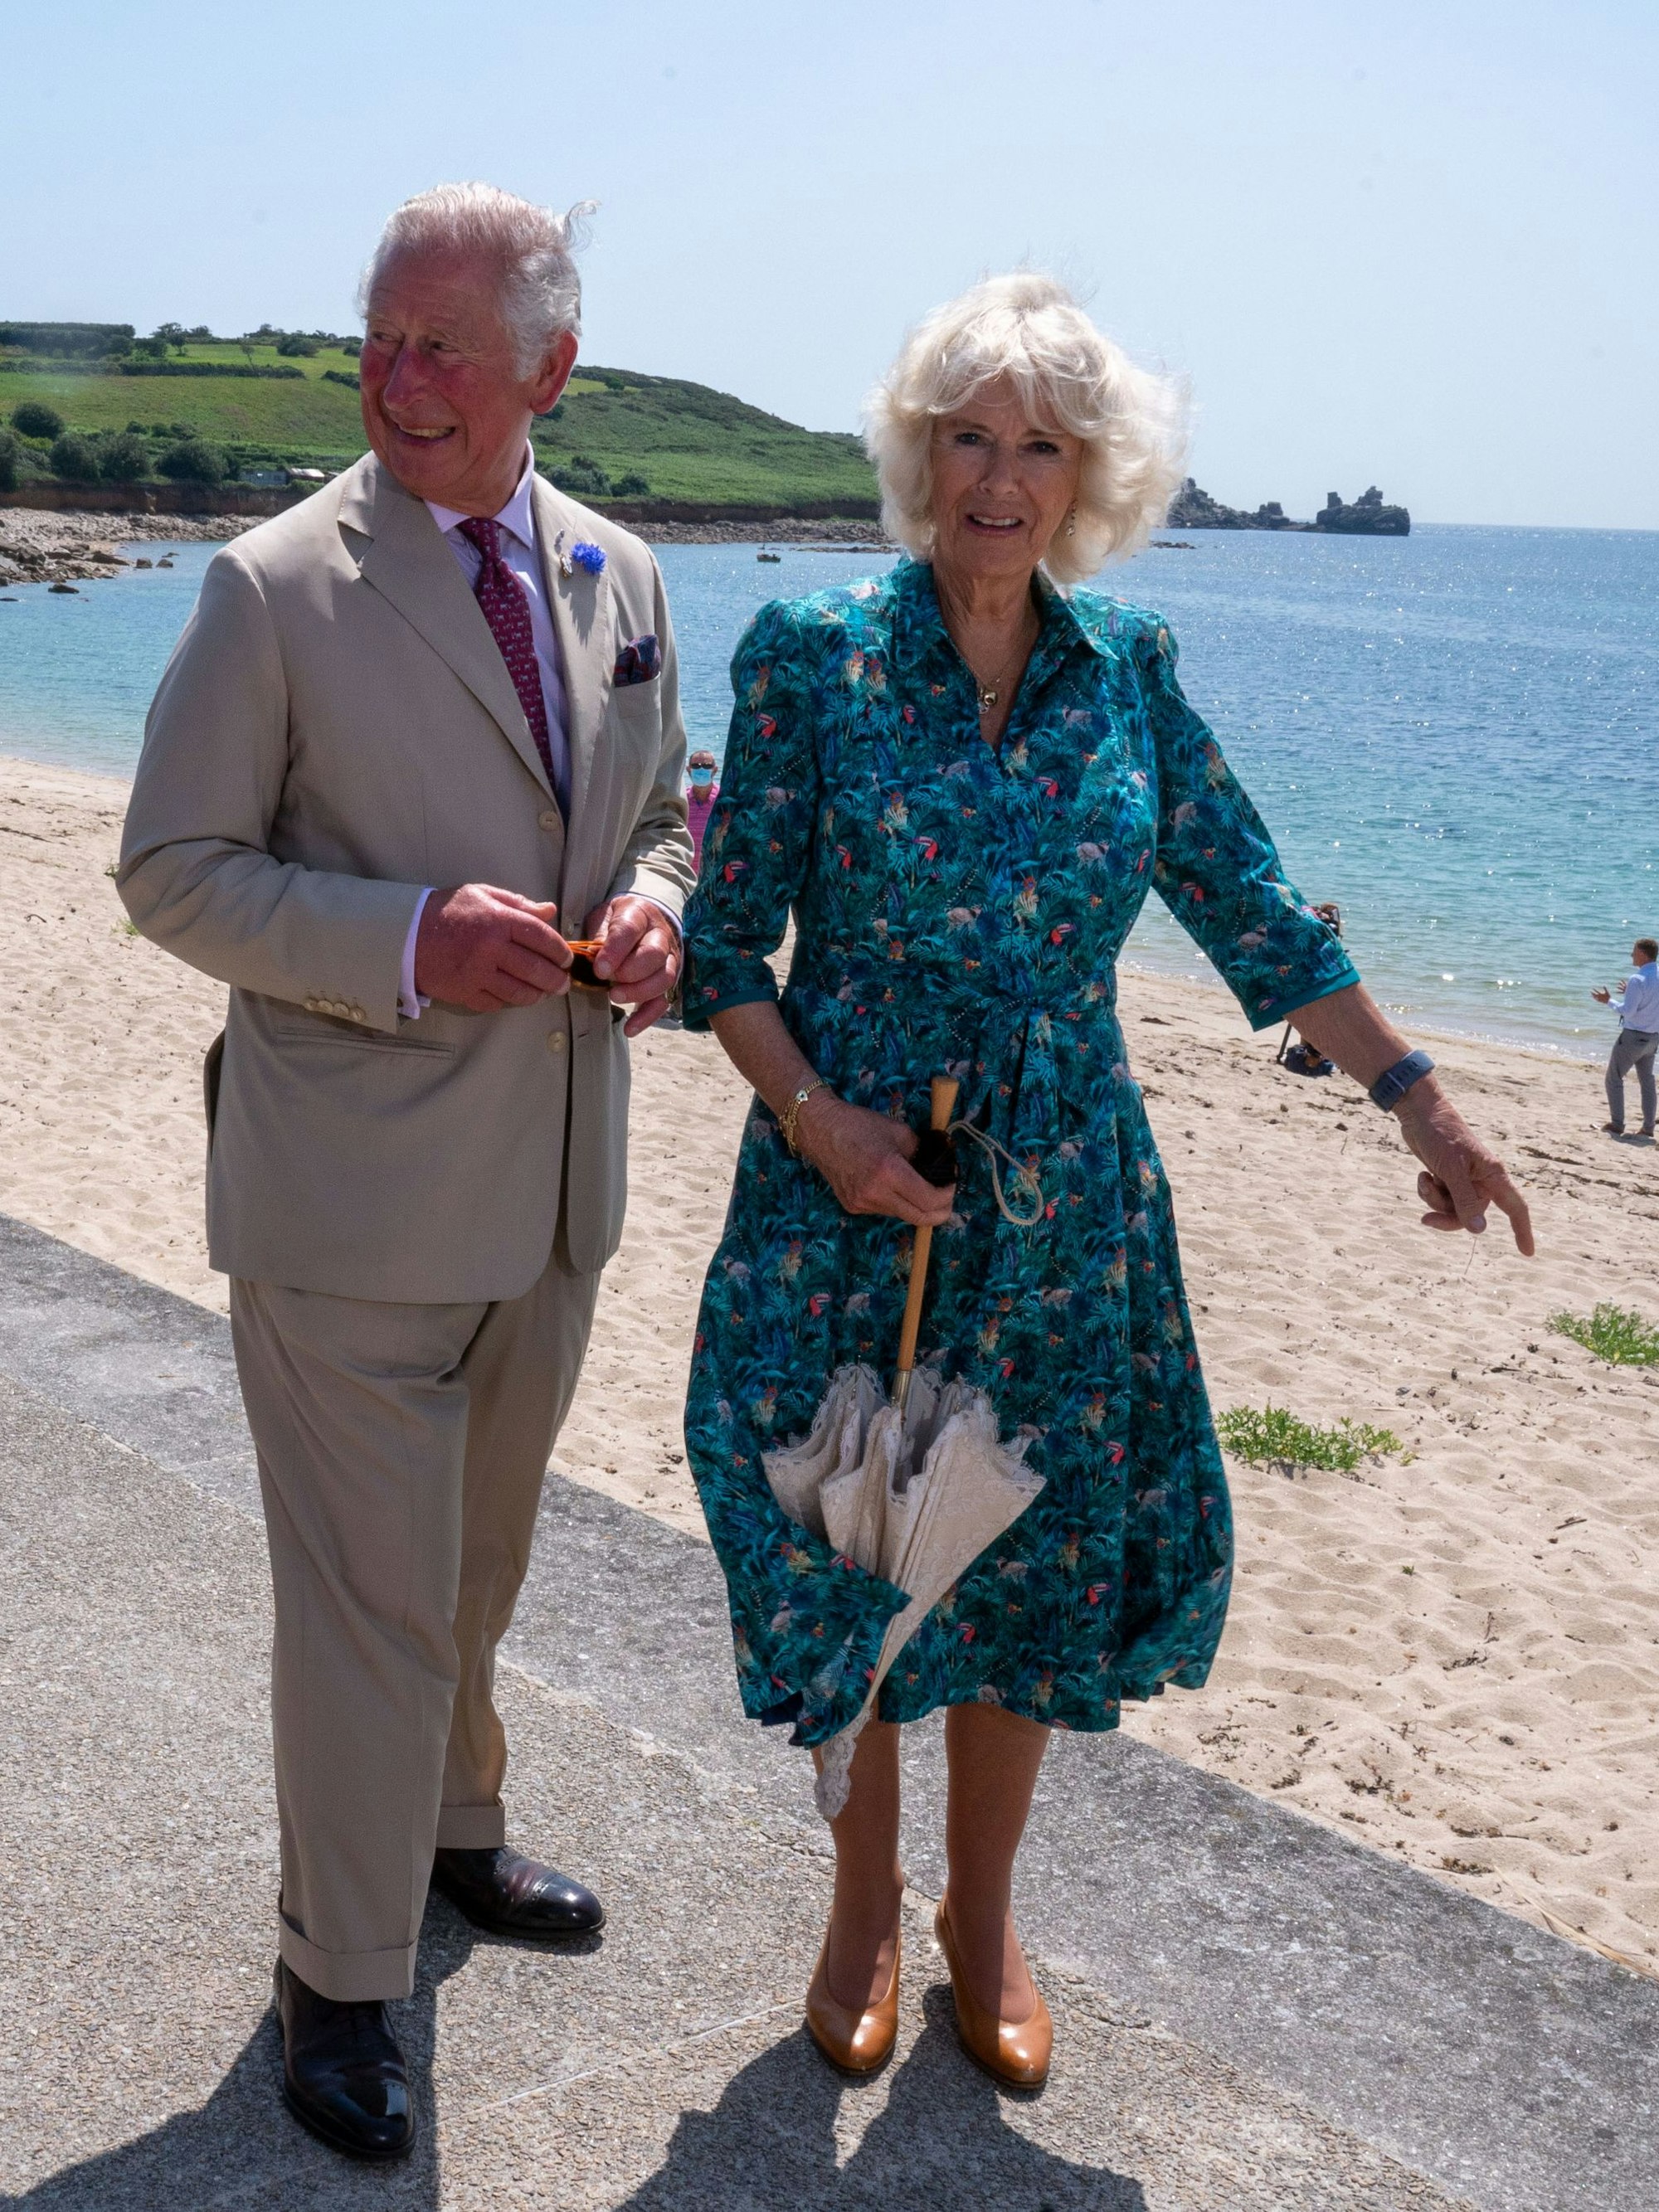 ISLES OF SCILLY, UNITED KINGDOM - JULY 20: Prince Charles, Prince of Wales and Camilla, Duchess of Cornwall visit St Mary's on July 20, 2021 on the Isles of Scilly, United Kingdom. (Photo by Arthur Edwards - WPA Pool/Getty Images)